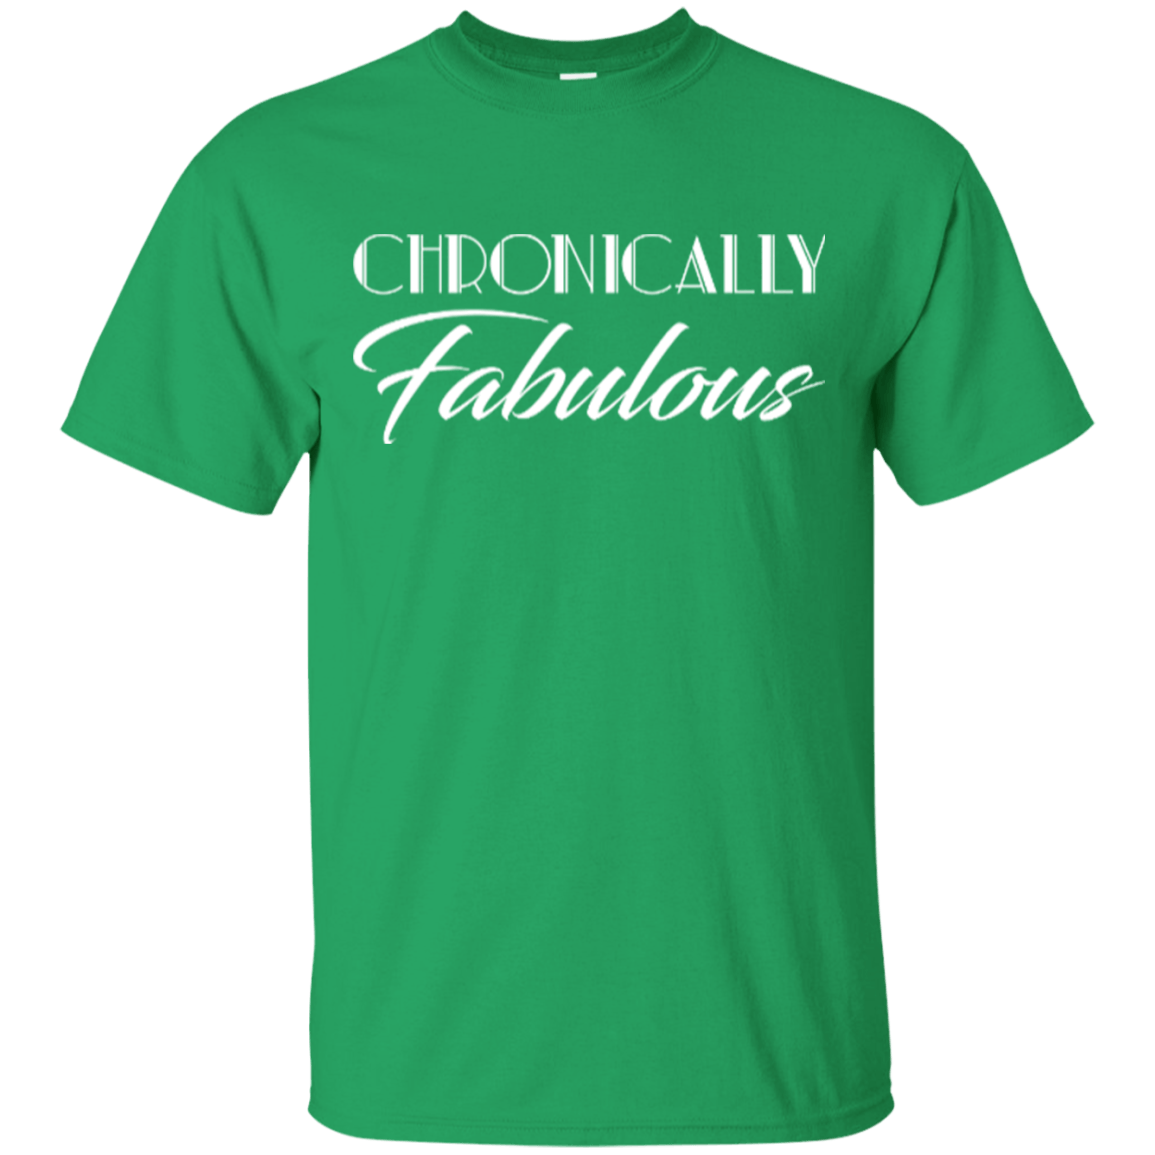 Chronically Fabulous Unisex Shirt - The Unchargeables